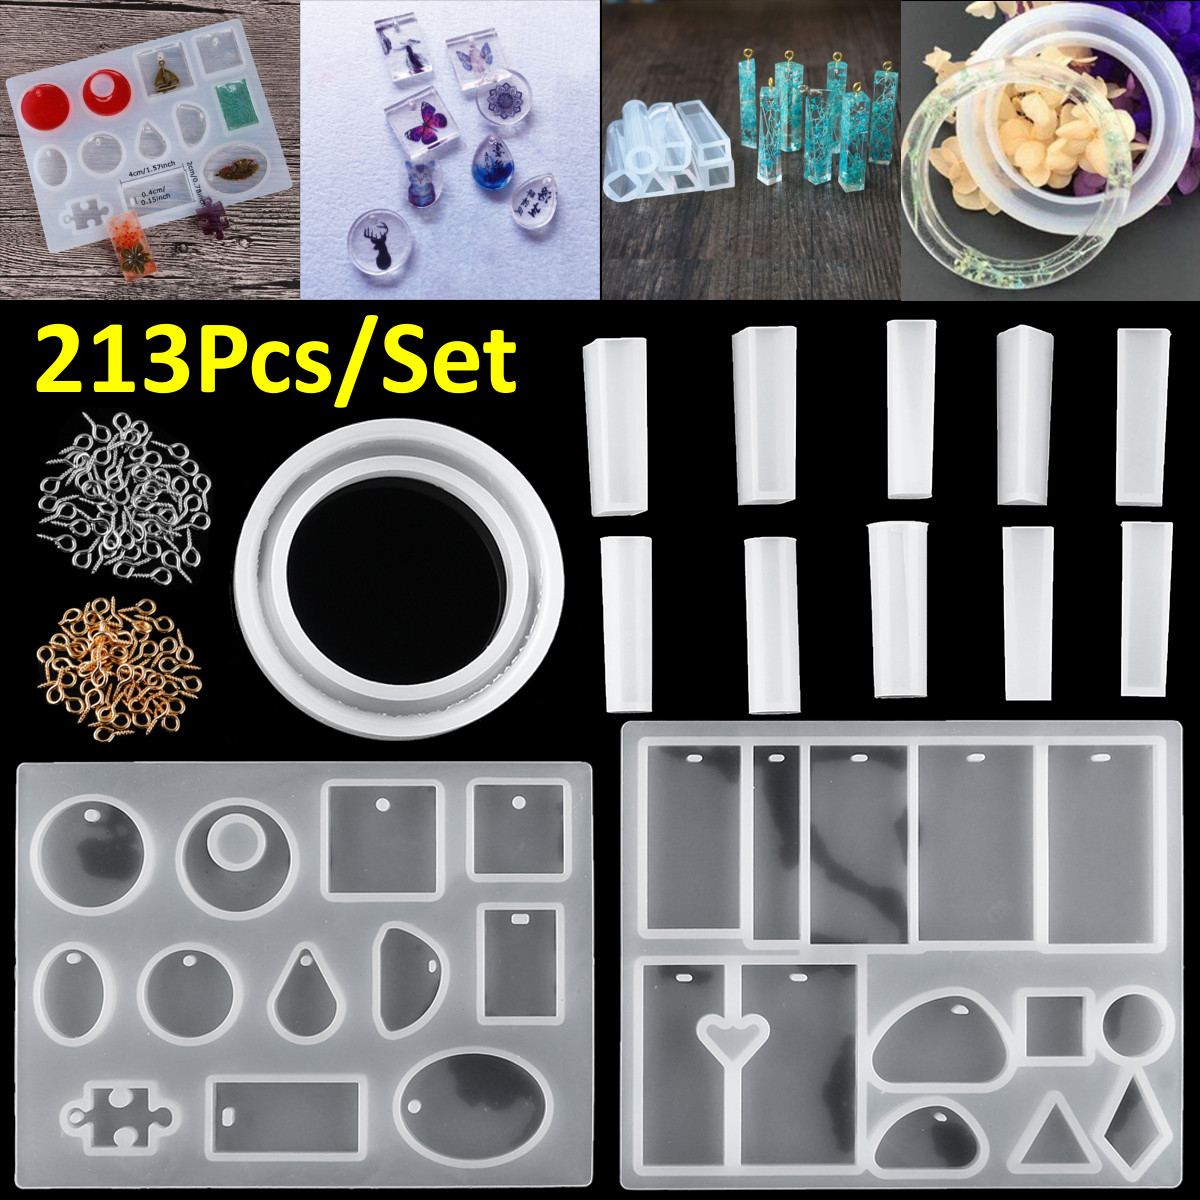 213Pcs-DIY-Epoxy-Resin-Casting-Molds-Kit-Silicone-Jewelry-Pendant-Craft-Making-Mould-1656483-1